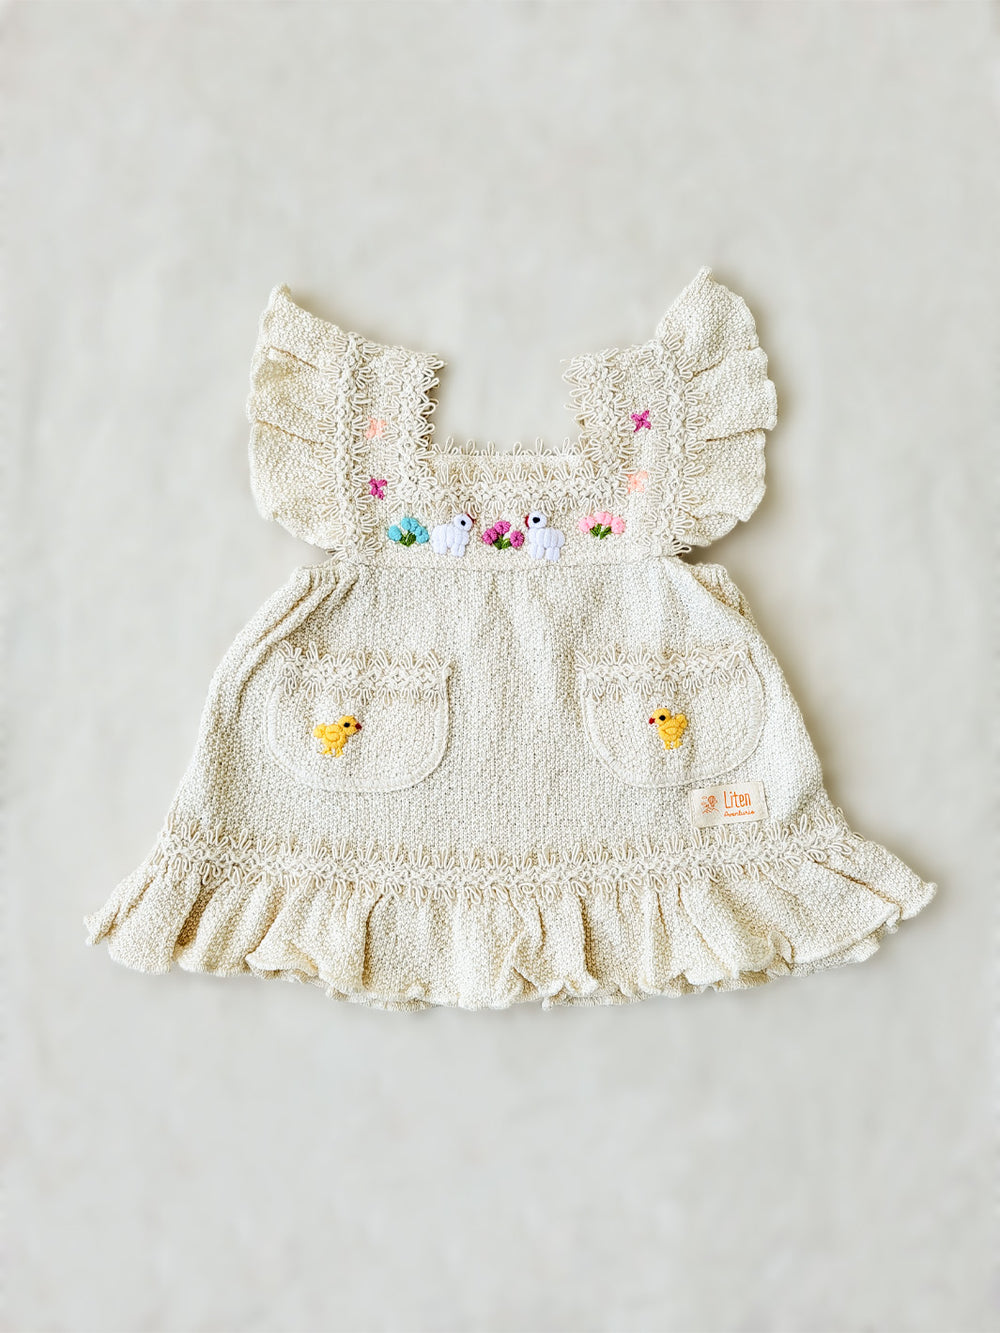 Liten Aventuris Collections. Experience the beauty of nature in the Elvita Dress! Hand-embroidered animals, flowers, and knitted cotton lace come together to create a whimsical look your little girl will love. With a snug A-line fit and playful butterfly sleeves, this dress is perfect for every outdoor adventure she can come up with. Nature’s beauty is literally at her fingertips! Made of natural peruvian knitted cotton, Ethically made in Peru. Ekologisk klänning för flickor och bebisar.